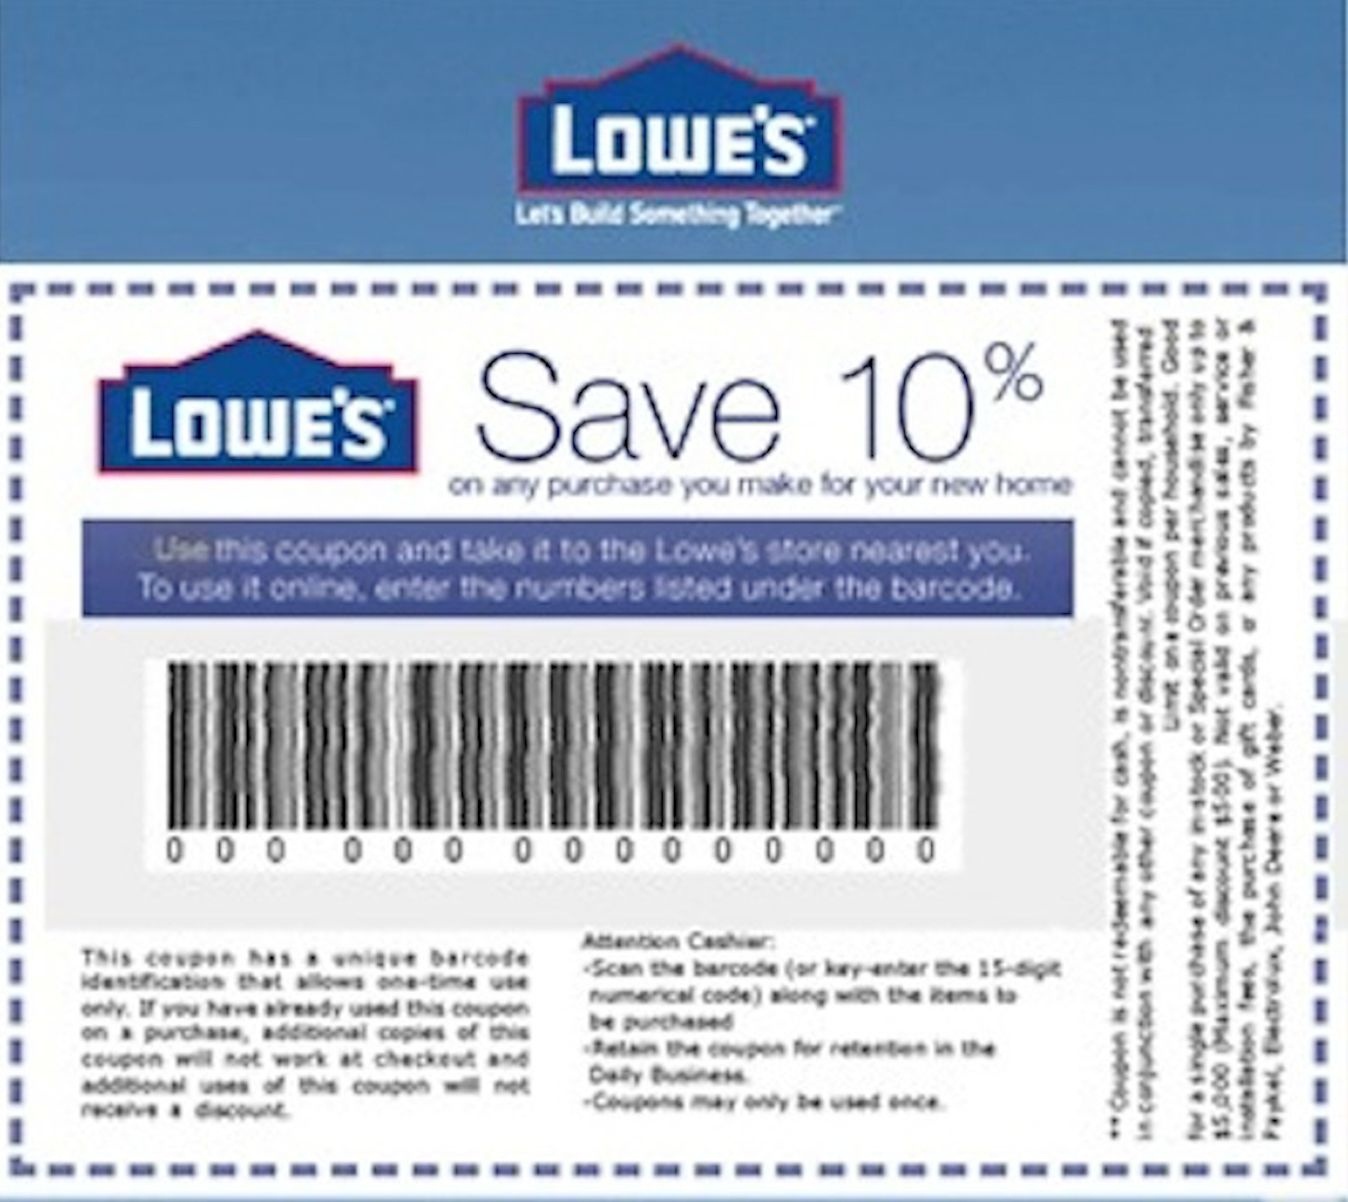 Coupons: Five (5X) Lowes 10% Off Printable-Coupons - Exp 5/31/17 - Lowes Coupons 20 Free Printable